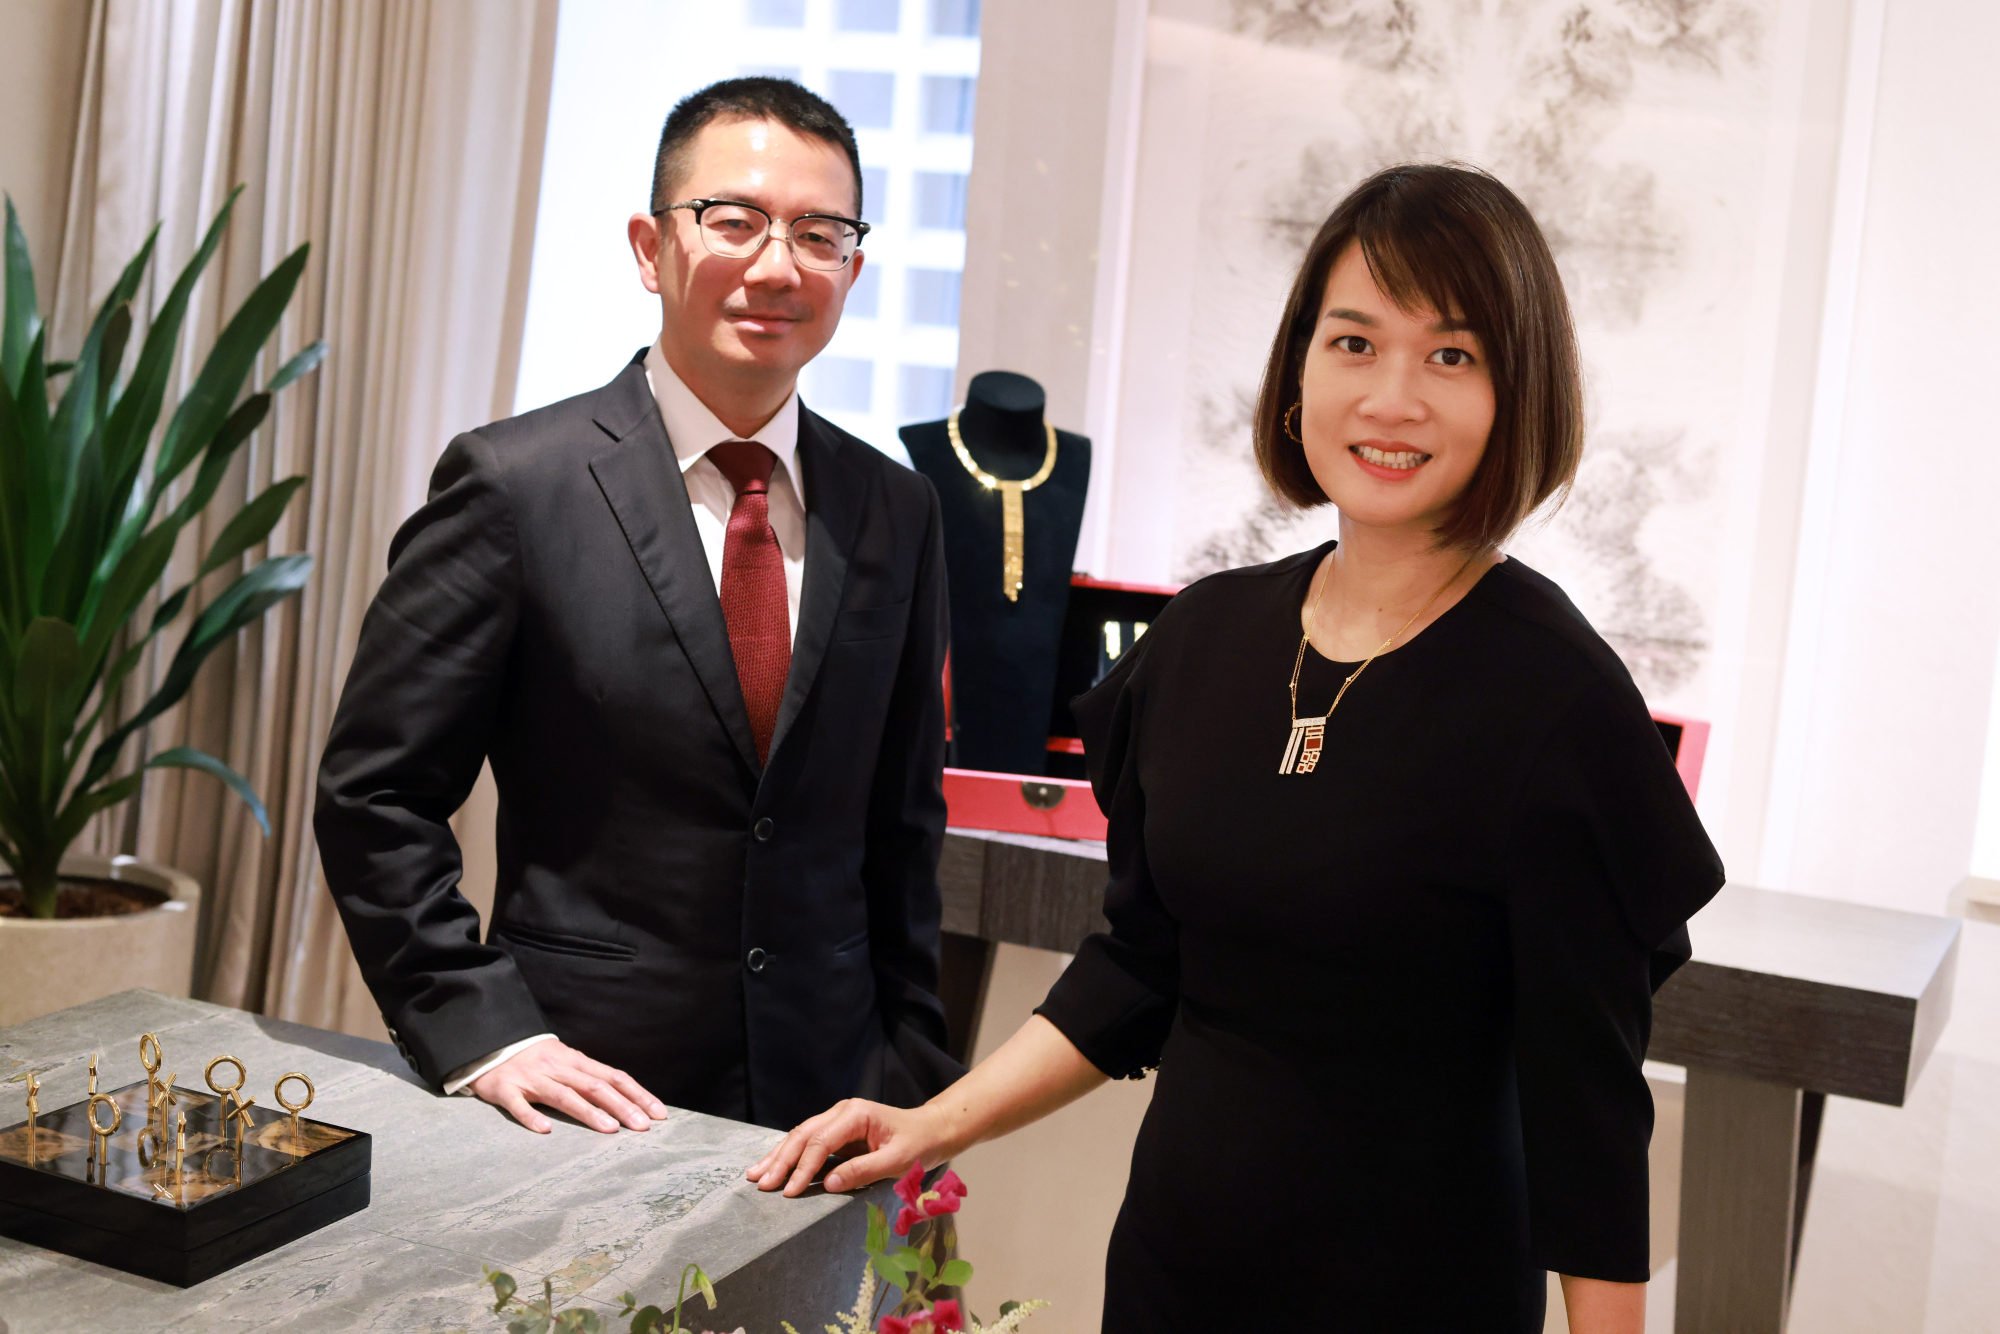 jewellery retailer chow tai fook plans to rejuvenate brand, renovate 8,000 stores in mainland china and hong kong